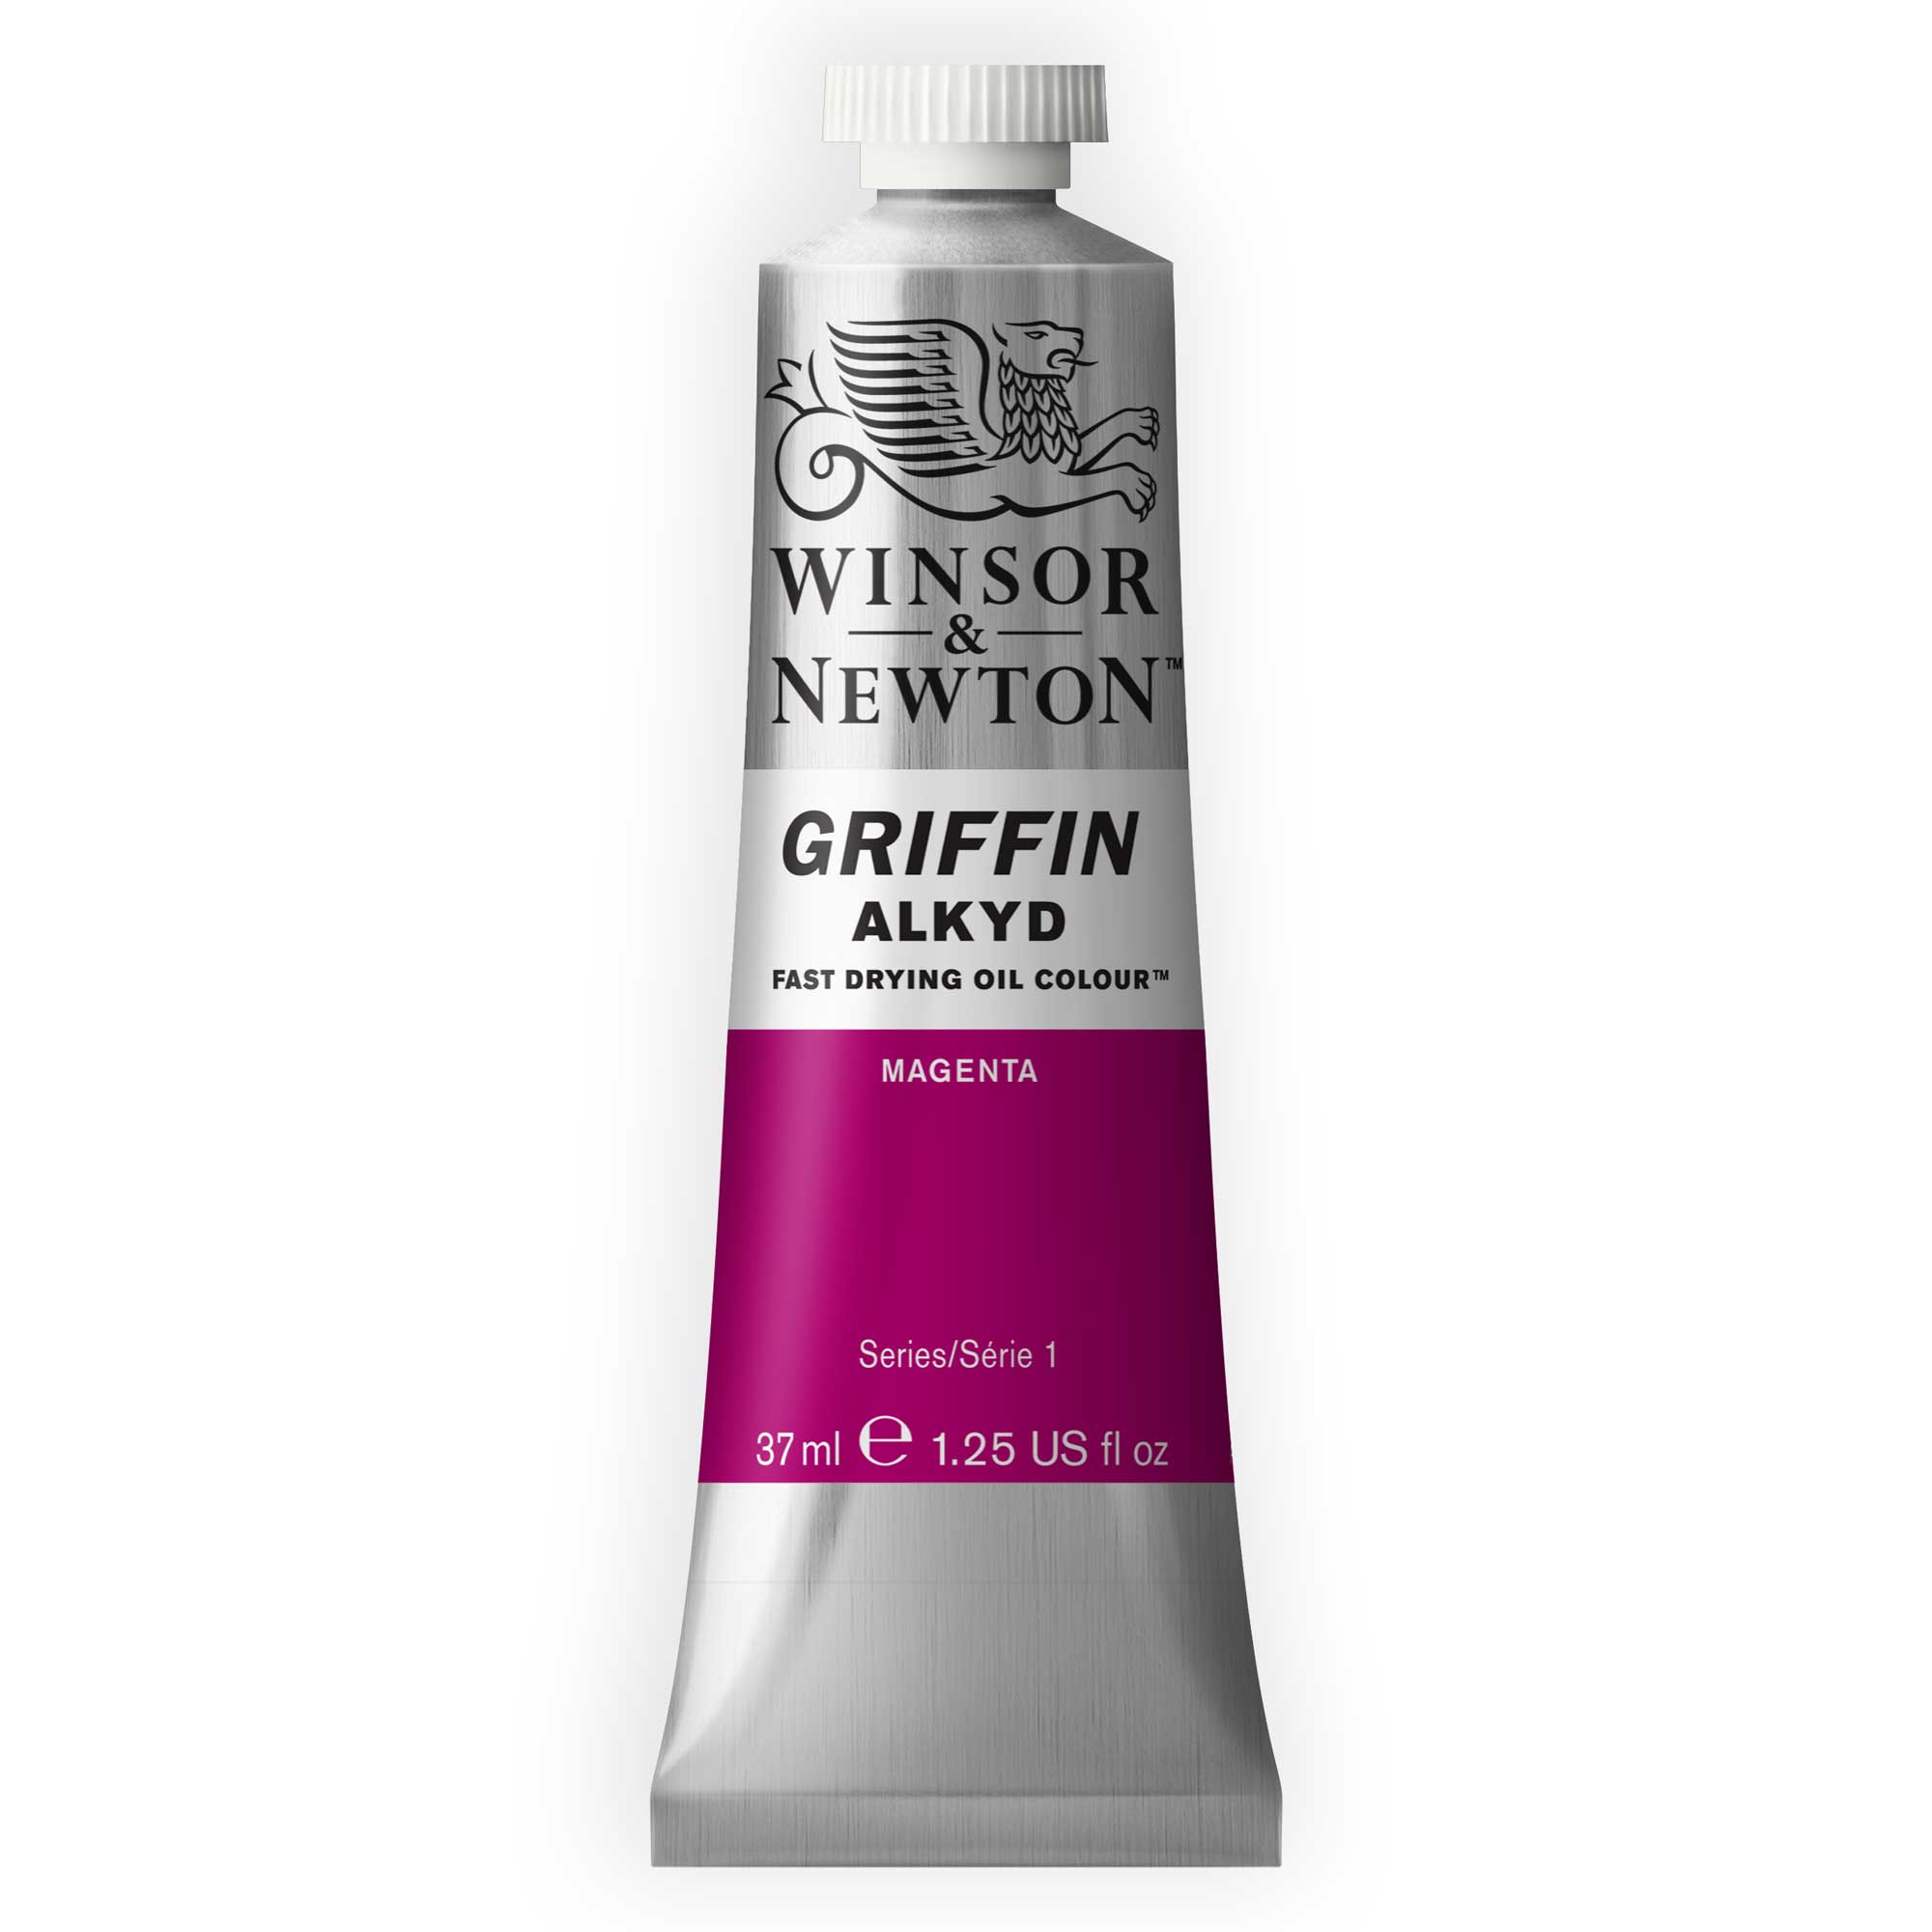 Winsor & Newton Griffin Alkyd Fast Drying Oil Colour 37ml - Series 1